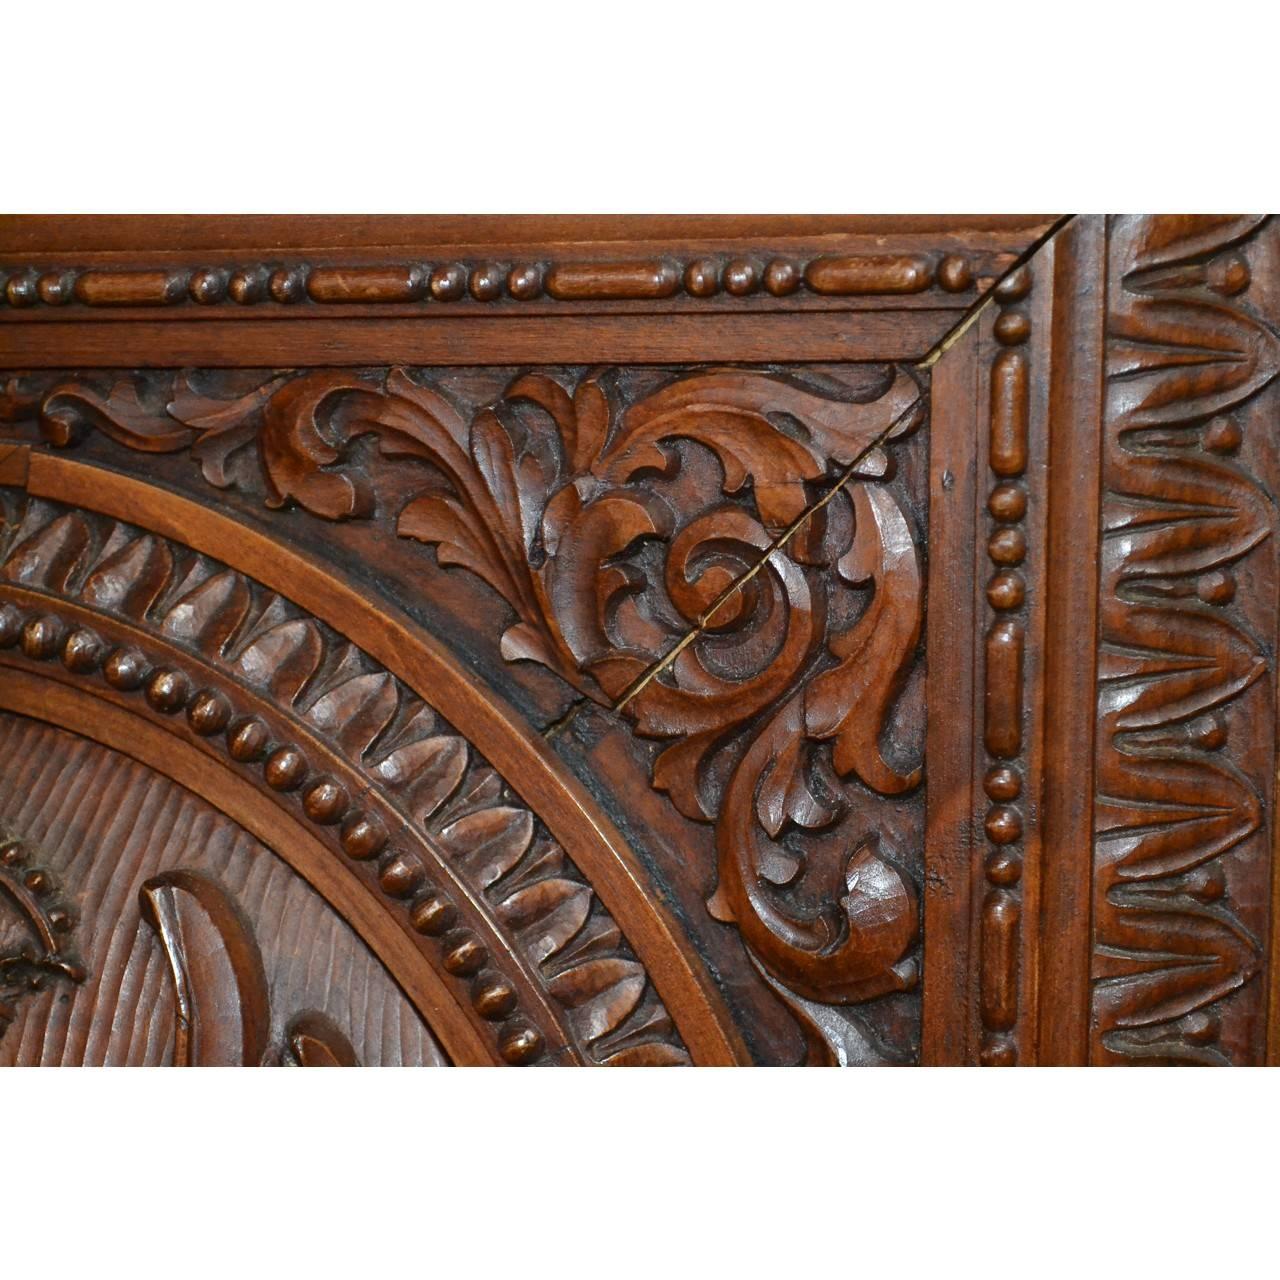 Carved in Germany, circa 1860.
Beautiful solid walnut.
Impressive eagle crest.